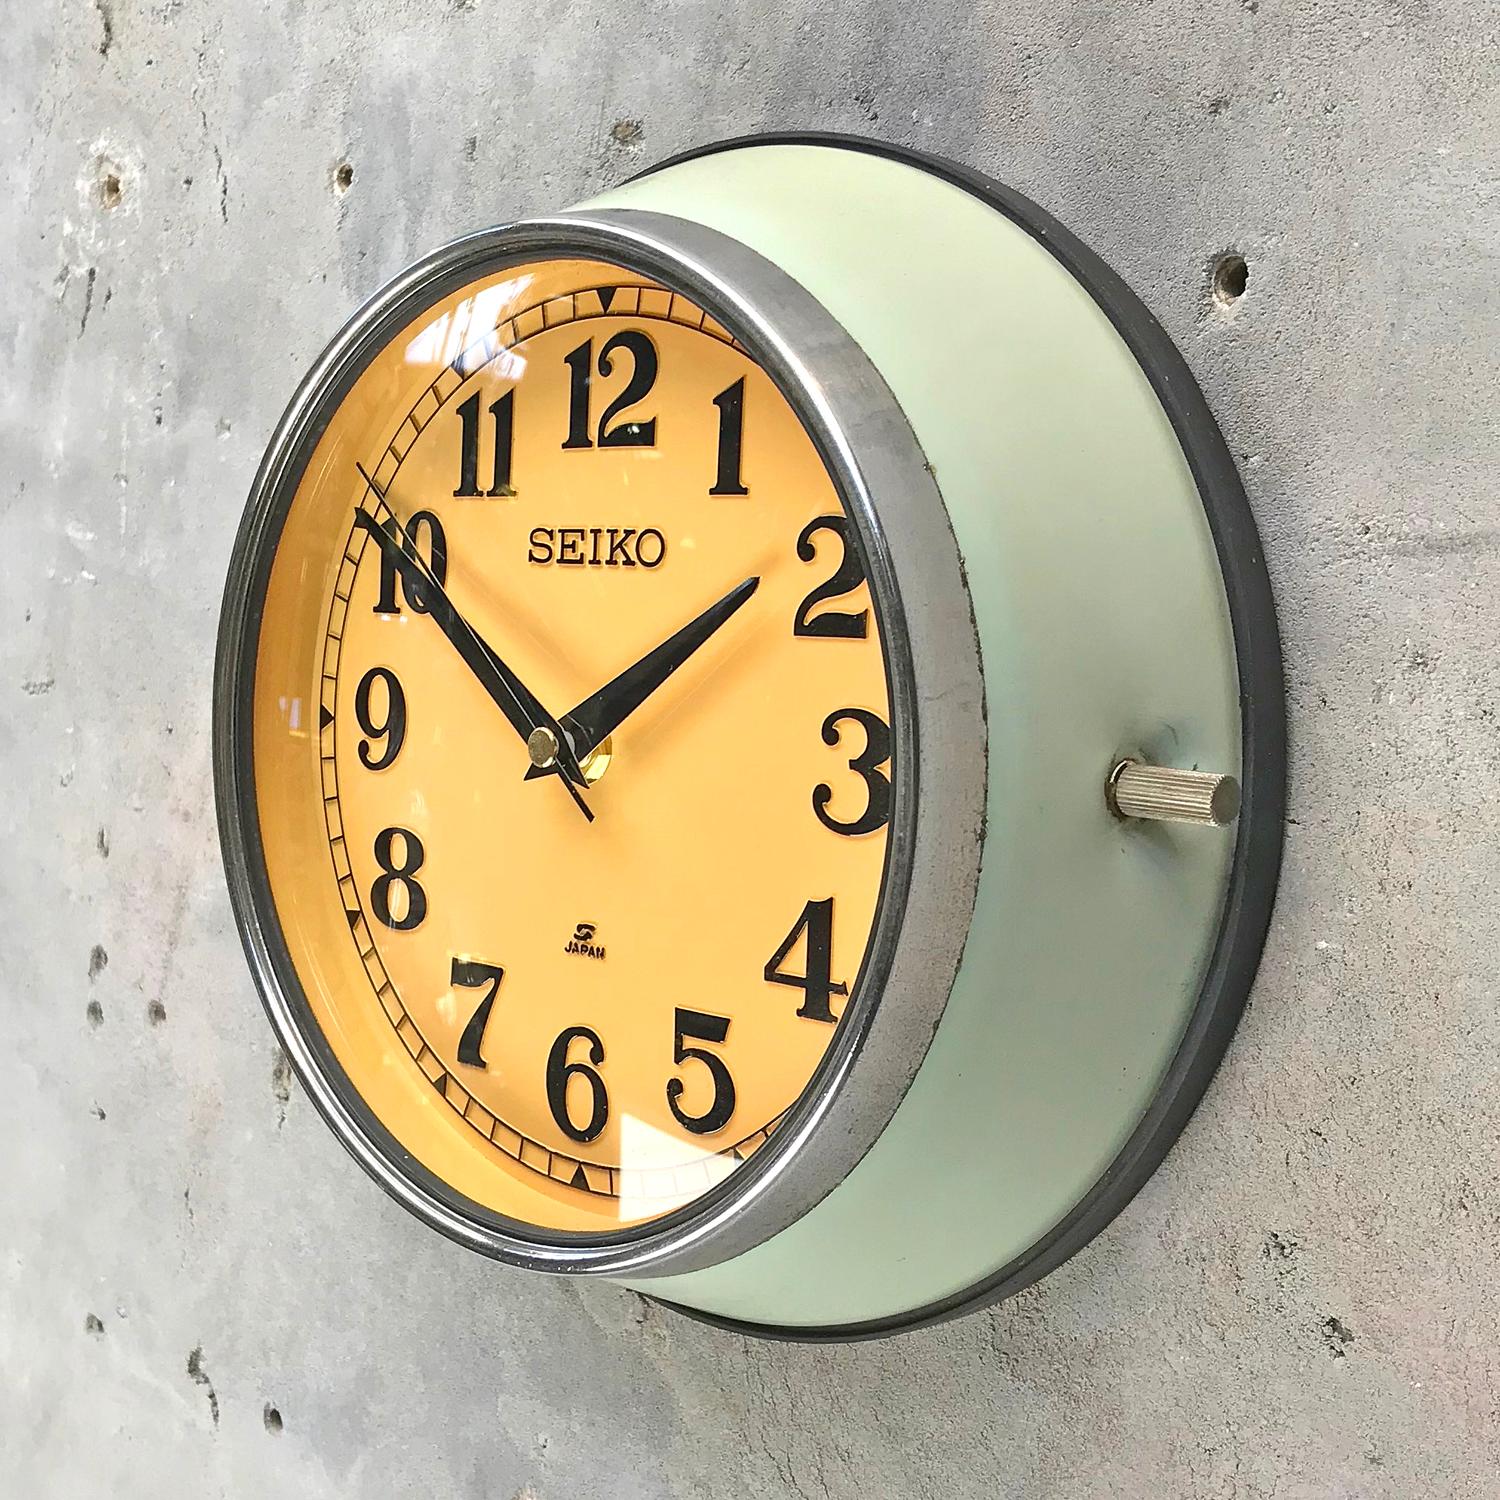 Seiko supertanker slave clock. 

A reclaimed and restored marine slave clock.

These clocks were used in great number on large sea going vessels built during the 1970s and housed a movement that would be controlled by a master clock.

We have